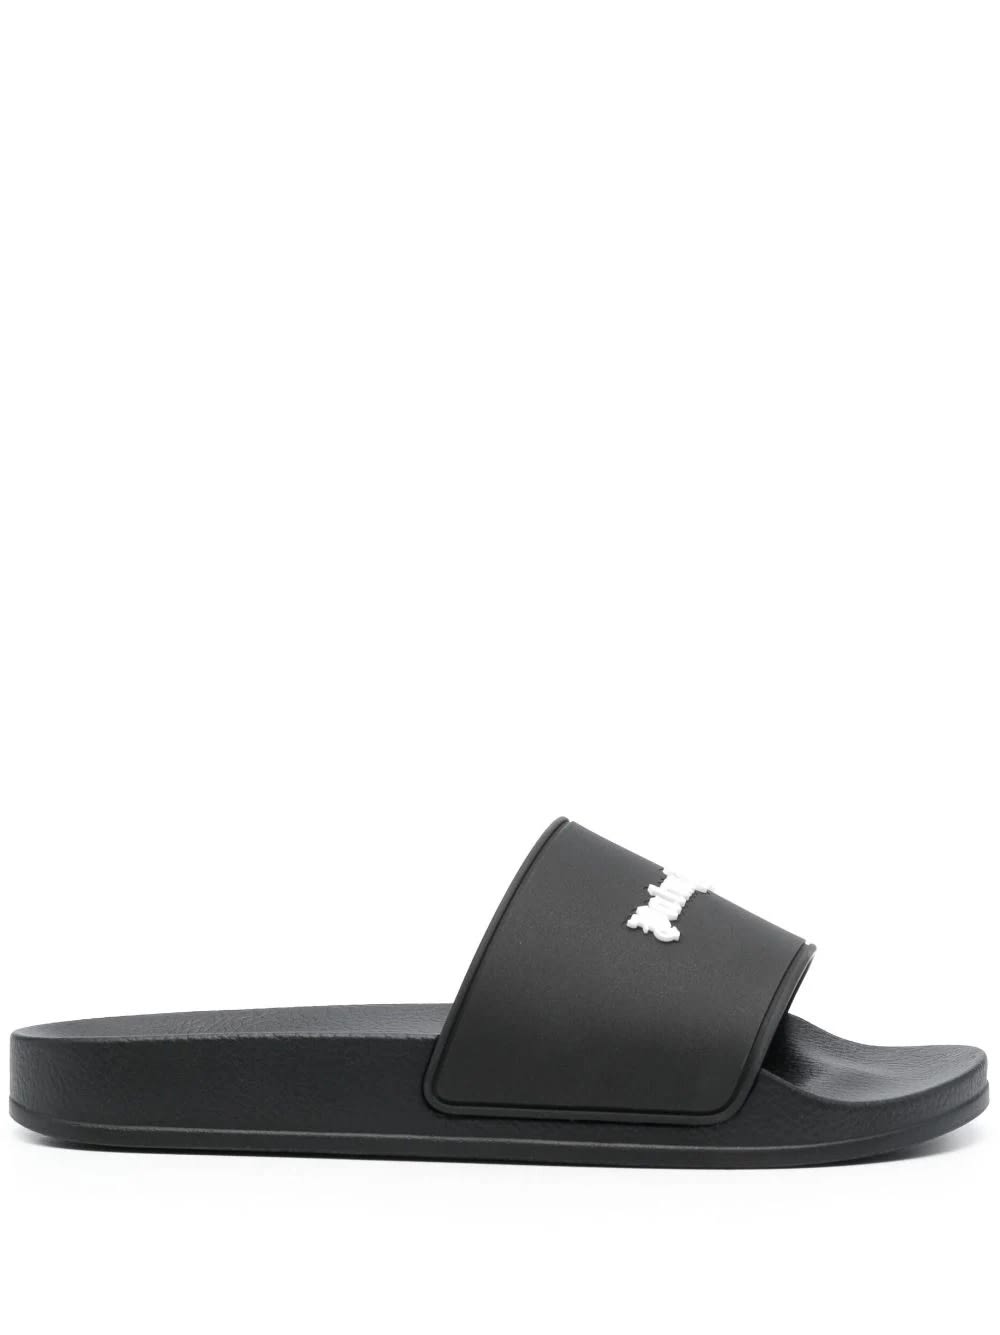 Black Slippers With White Logo